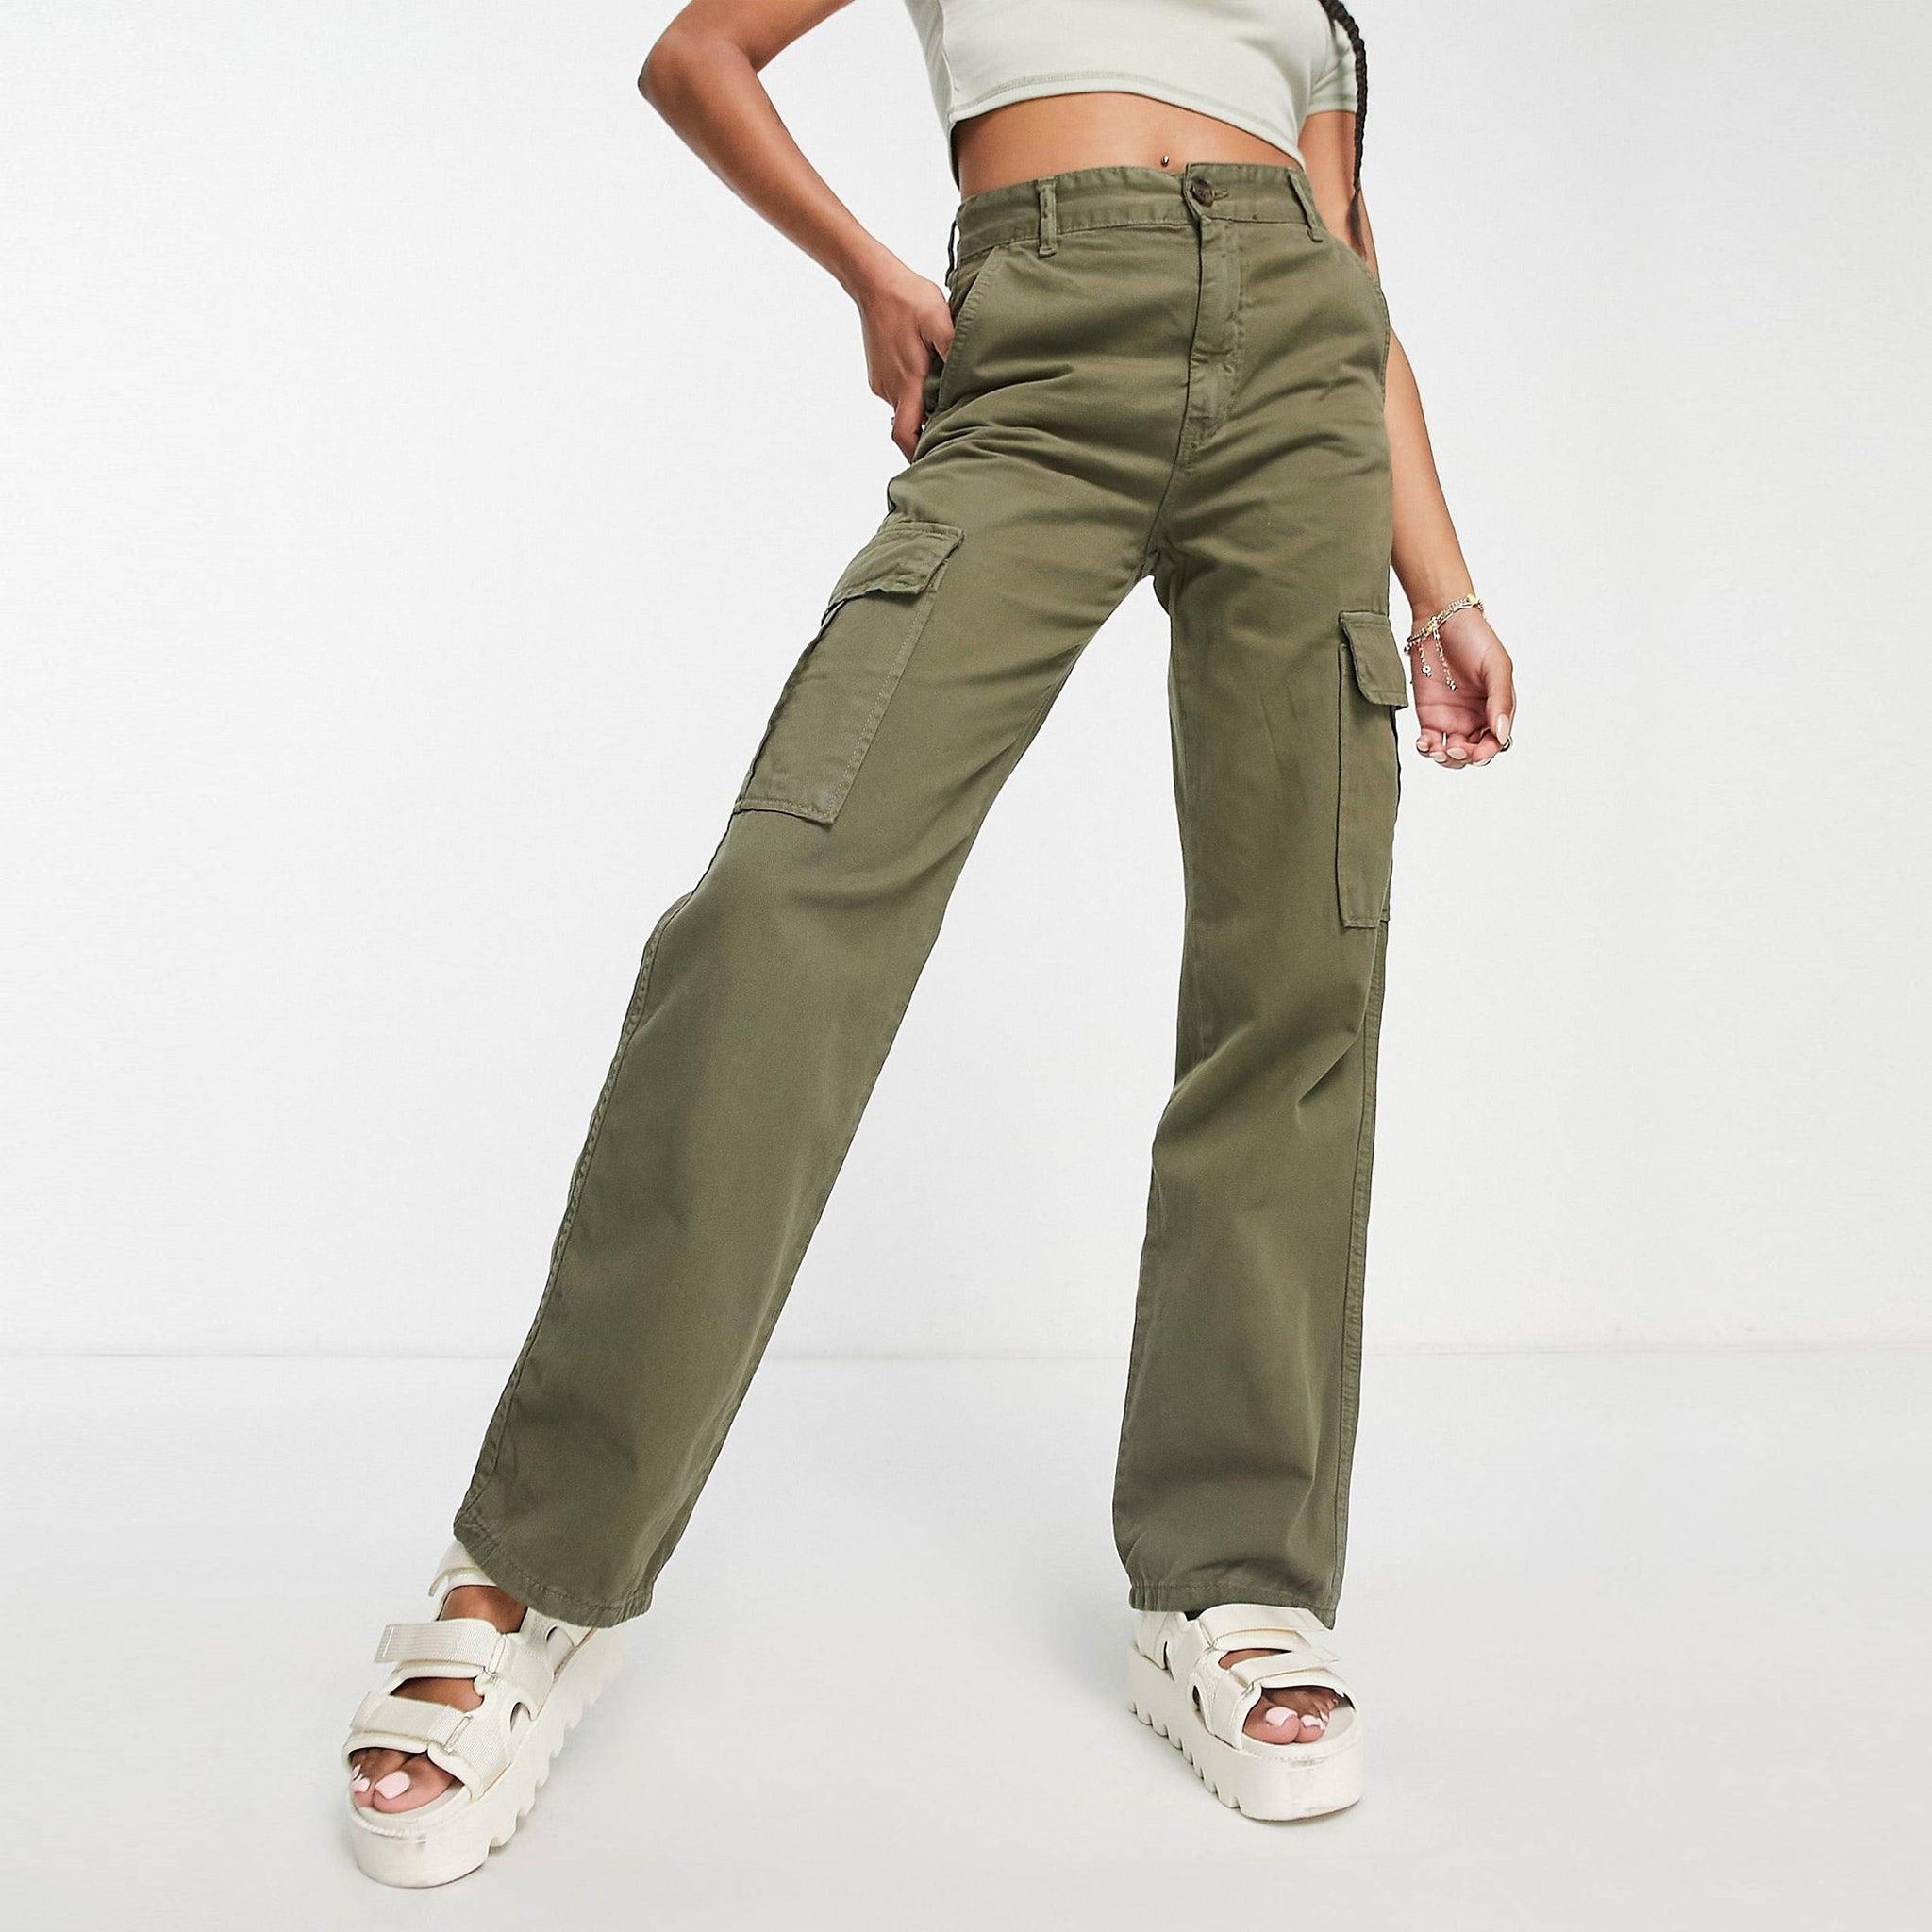 Wolfast High Waisted Cargo Pants Women Baggy Jeans with Pockets Girls  Casual Wide Leg Work Pants Small Army Green at Amazon Women's Jeans store